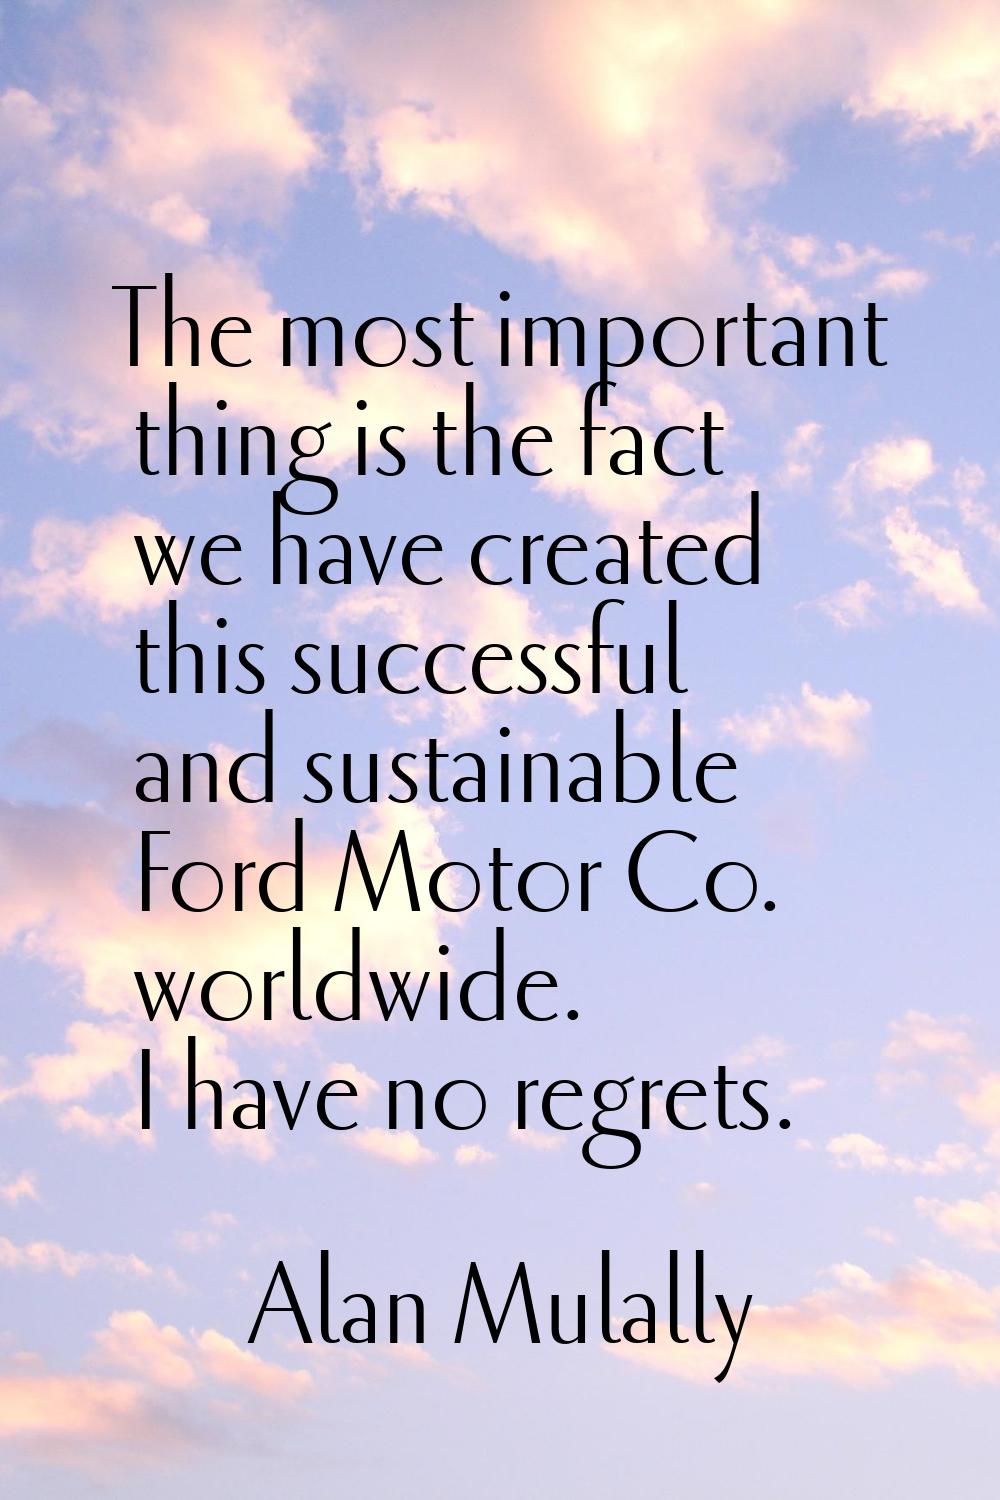 The most important thing is the fact we have created this successful and sustainable Ford Motor Co.